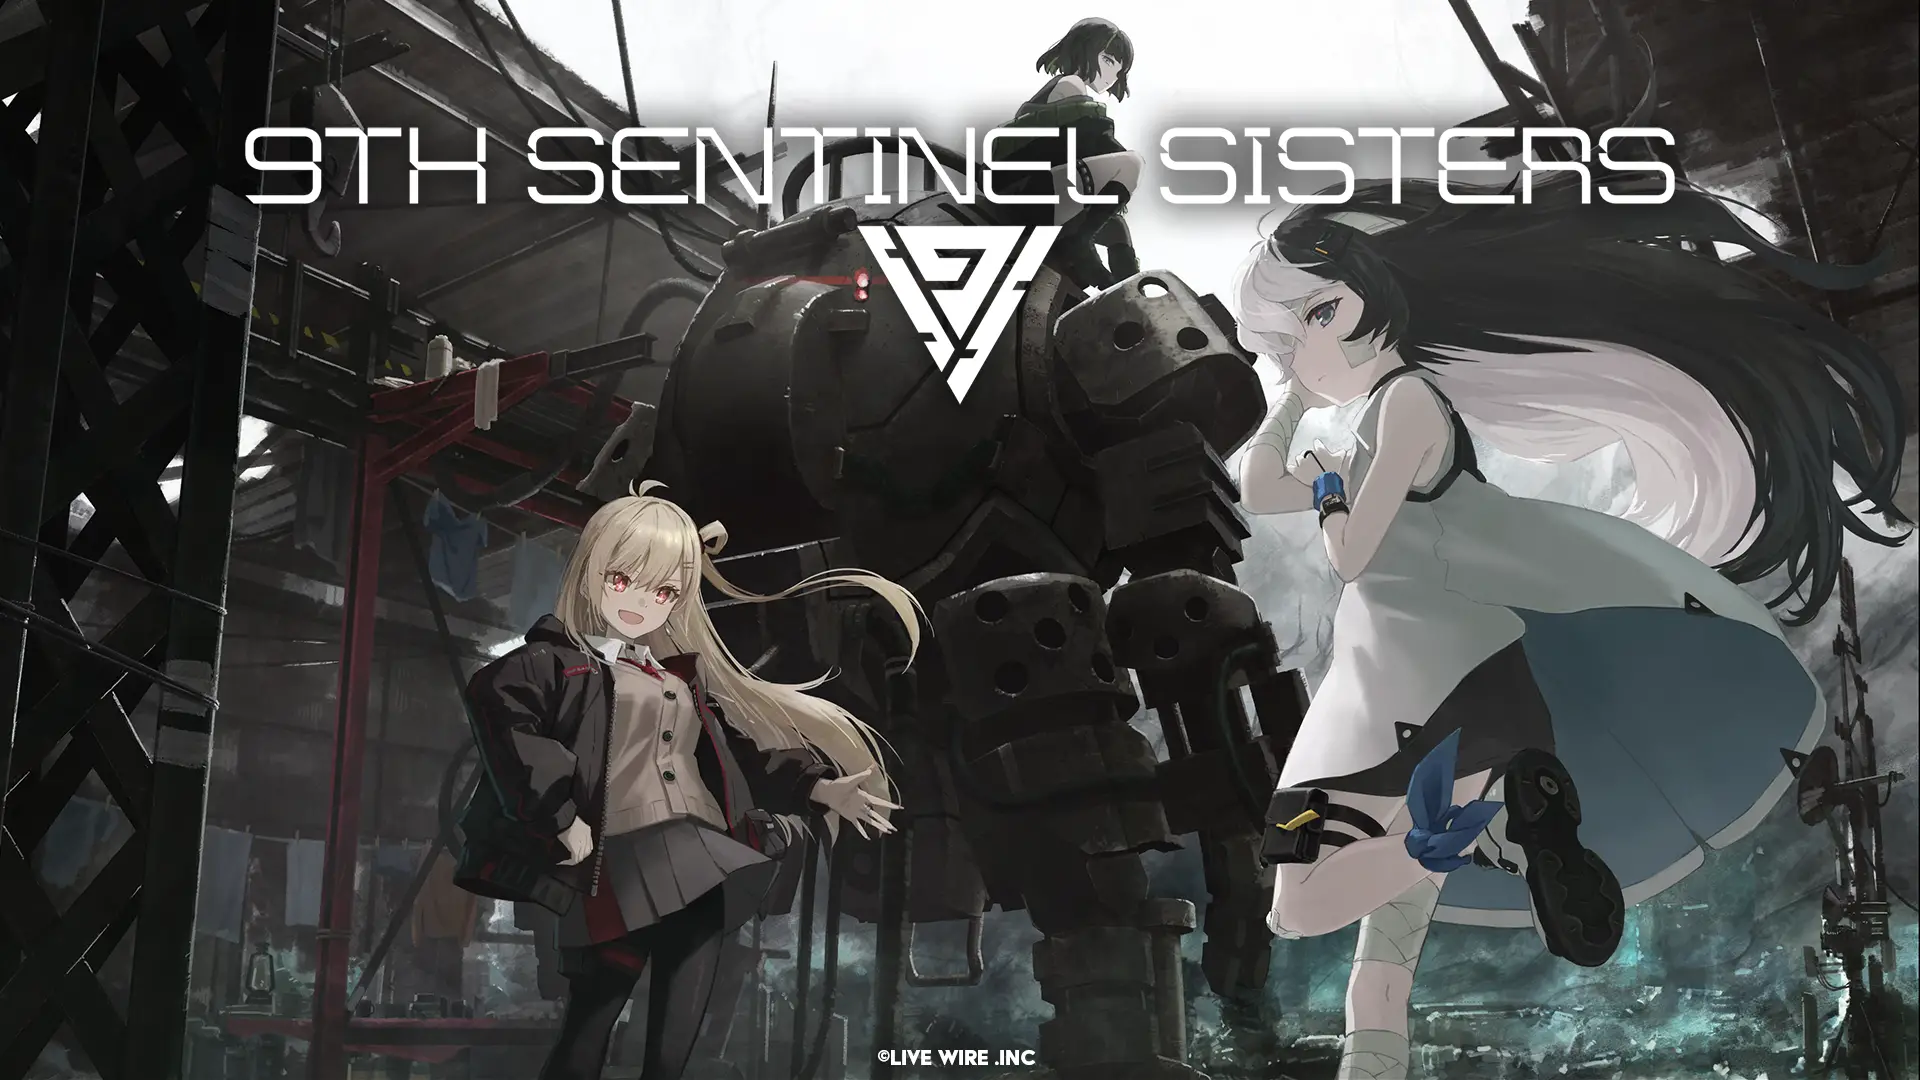 Rogue-Lite Shooter ‘9th Sentinel Sisters’ Launches Into Steam Early Access